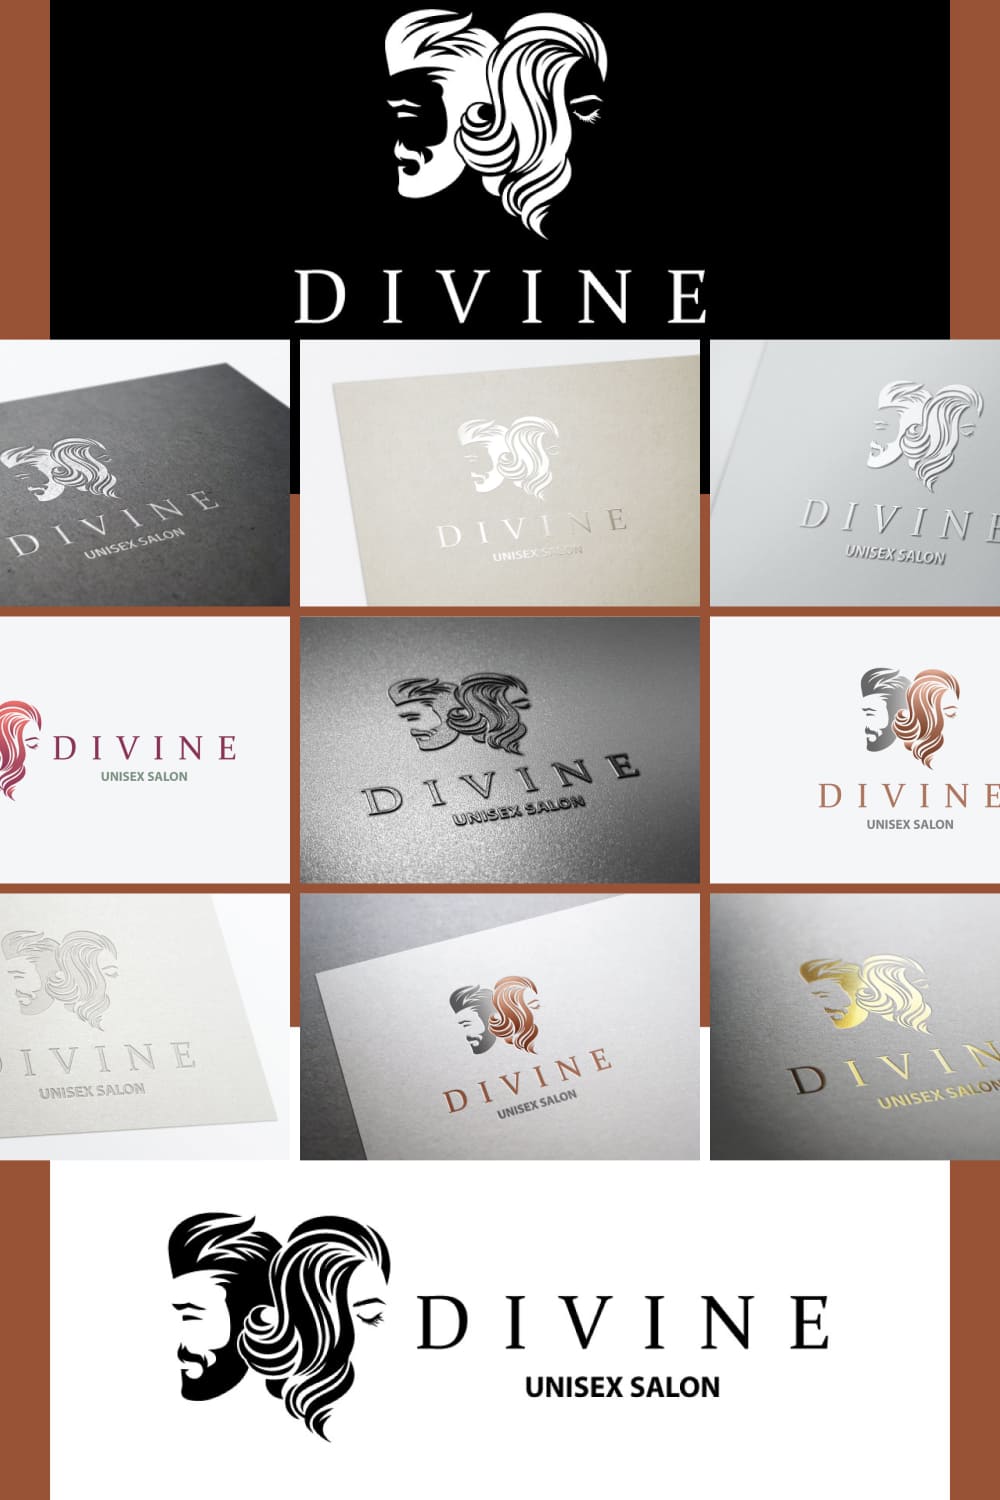 Great logo design for your personal brand.